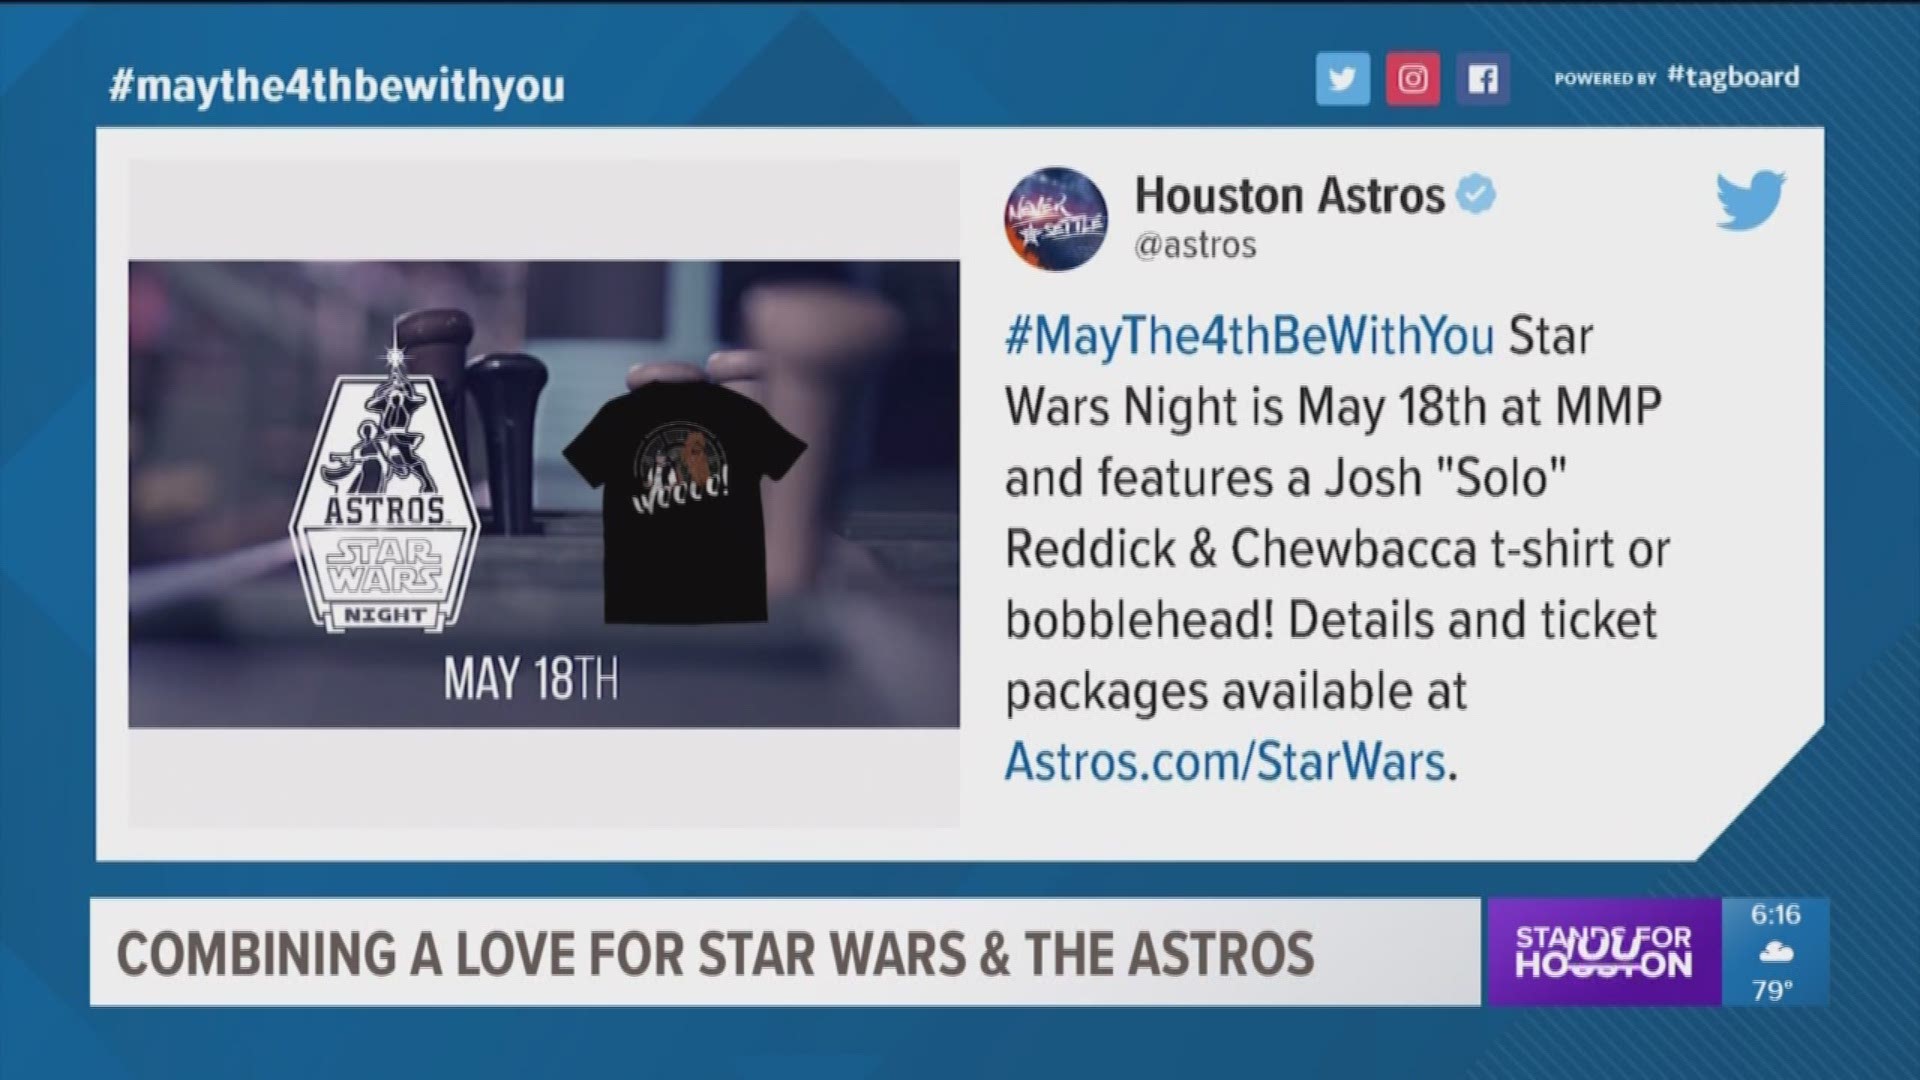 For Star Wars fans, the Houston Astros have plans to celebrate during Star Wars Night May 18 at Minute Maid Park.